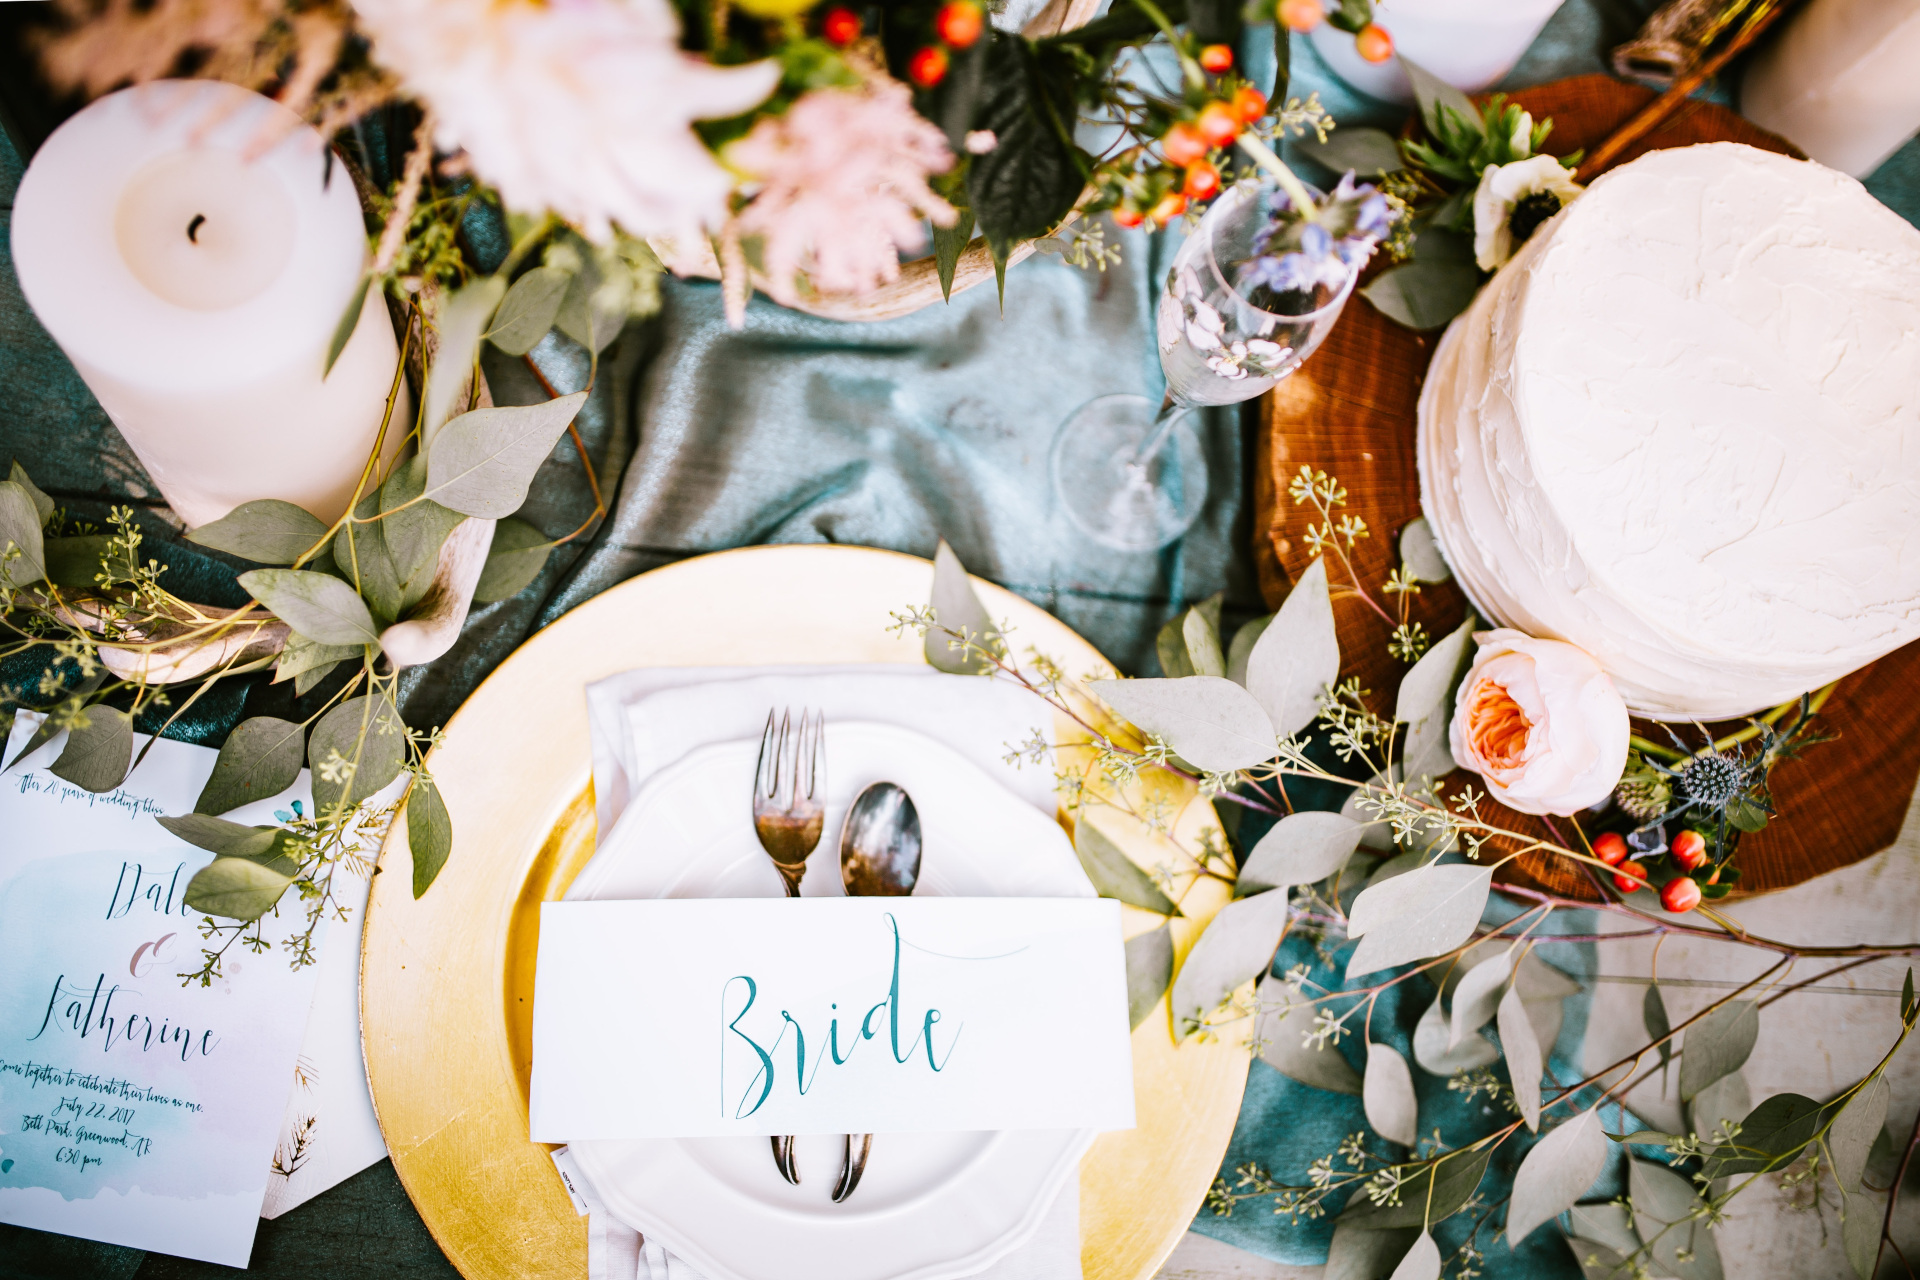 Wedding table set with bride's placeholder